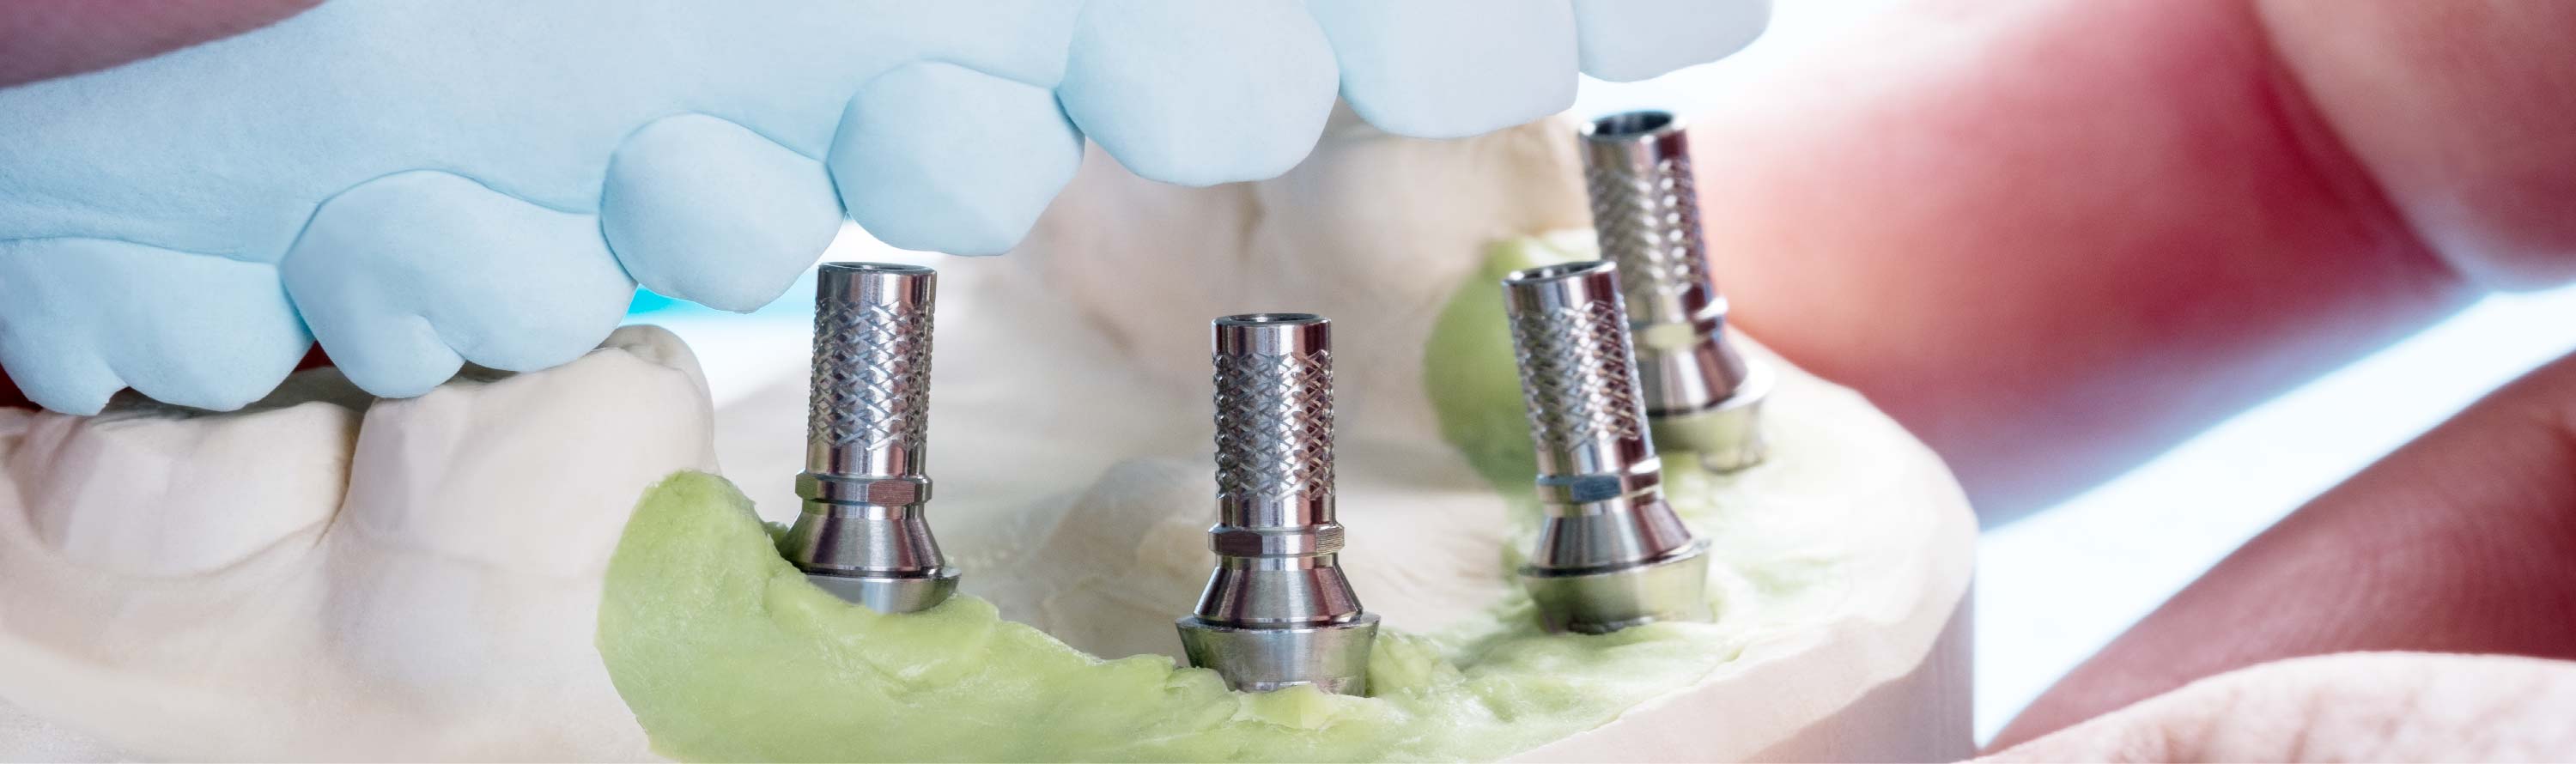 dental implant healing stages